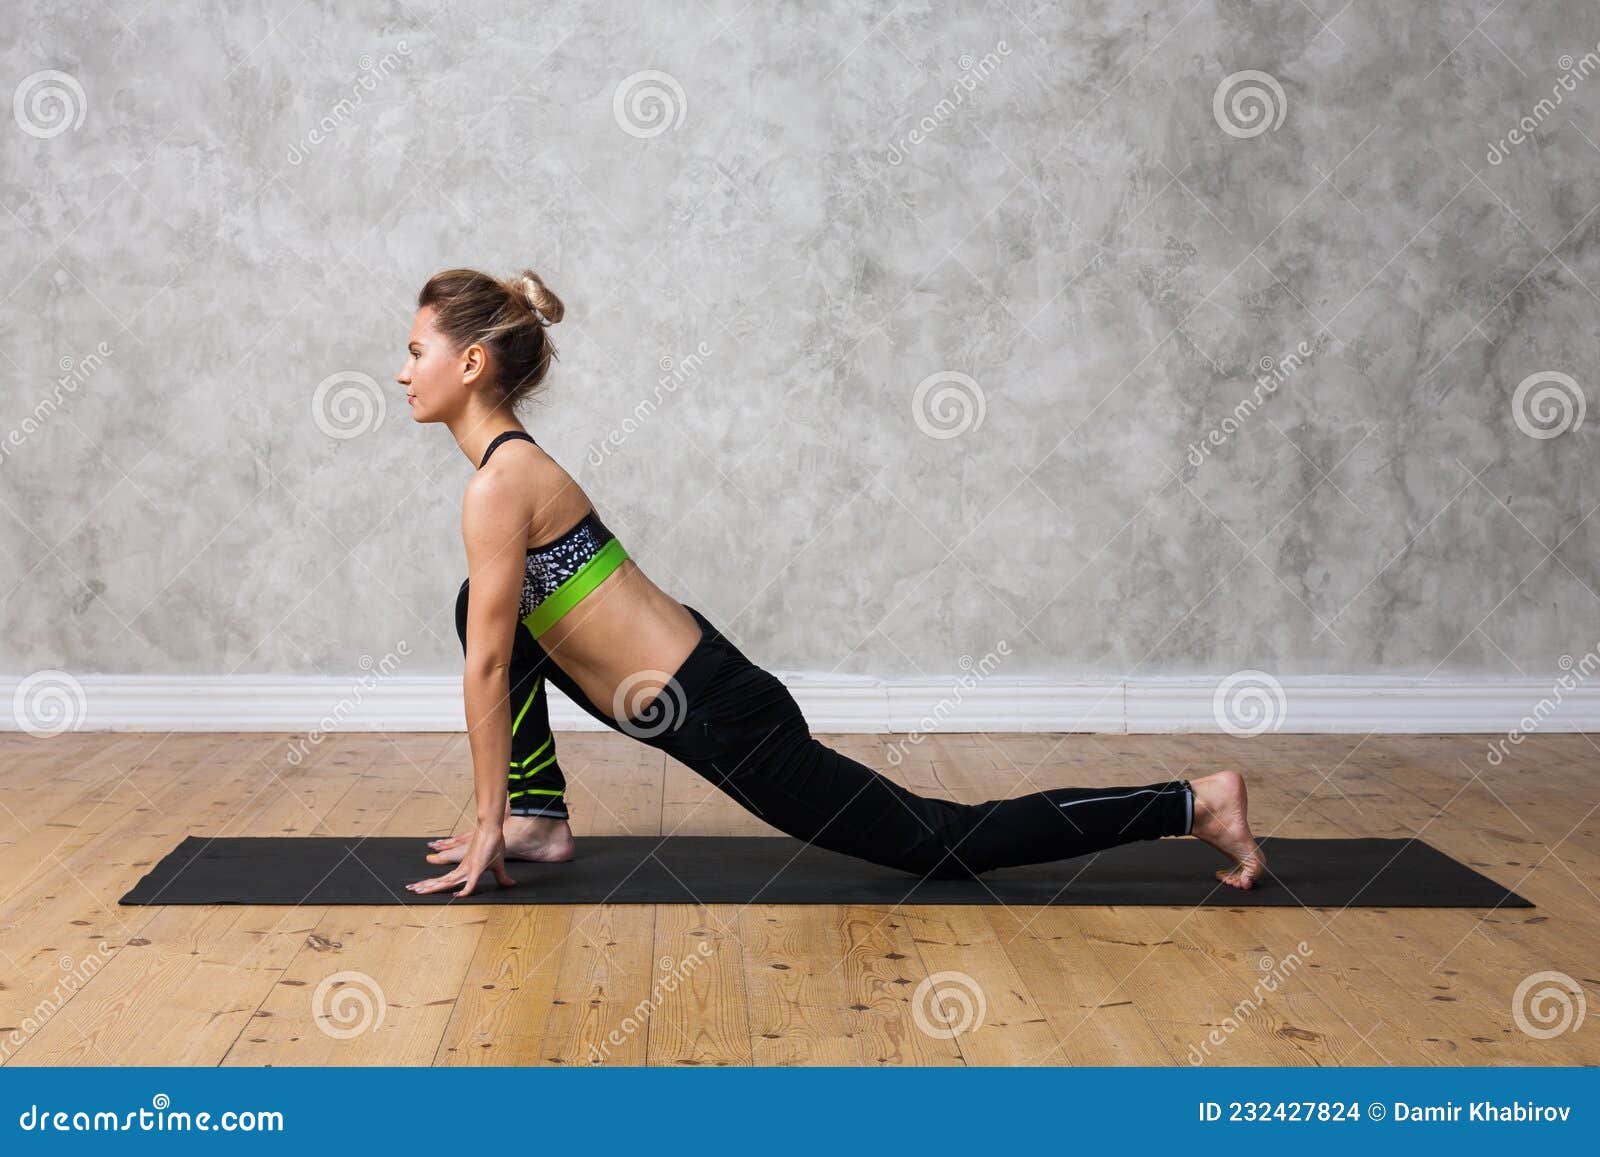 Young Woman Practicing Ashwa Sanchalanasana The Equestrian Yoga Pose  Against Texturized Wall Urban Background Stock Photo - Download Image Now -  iStock